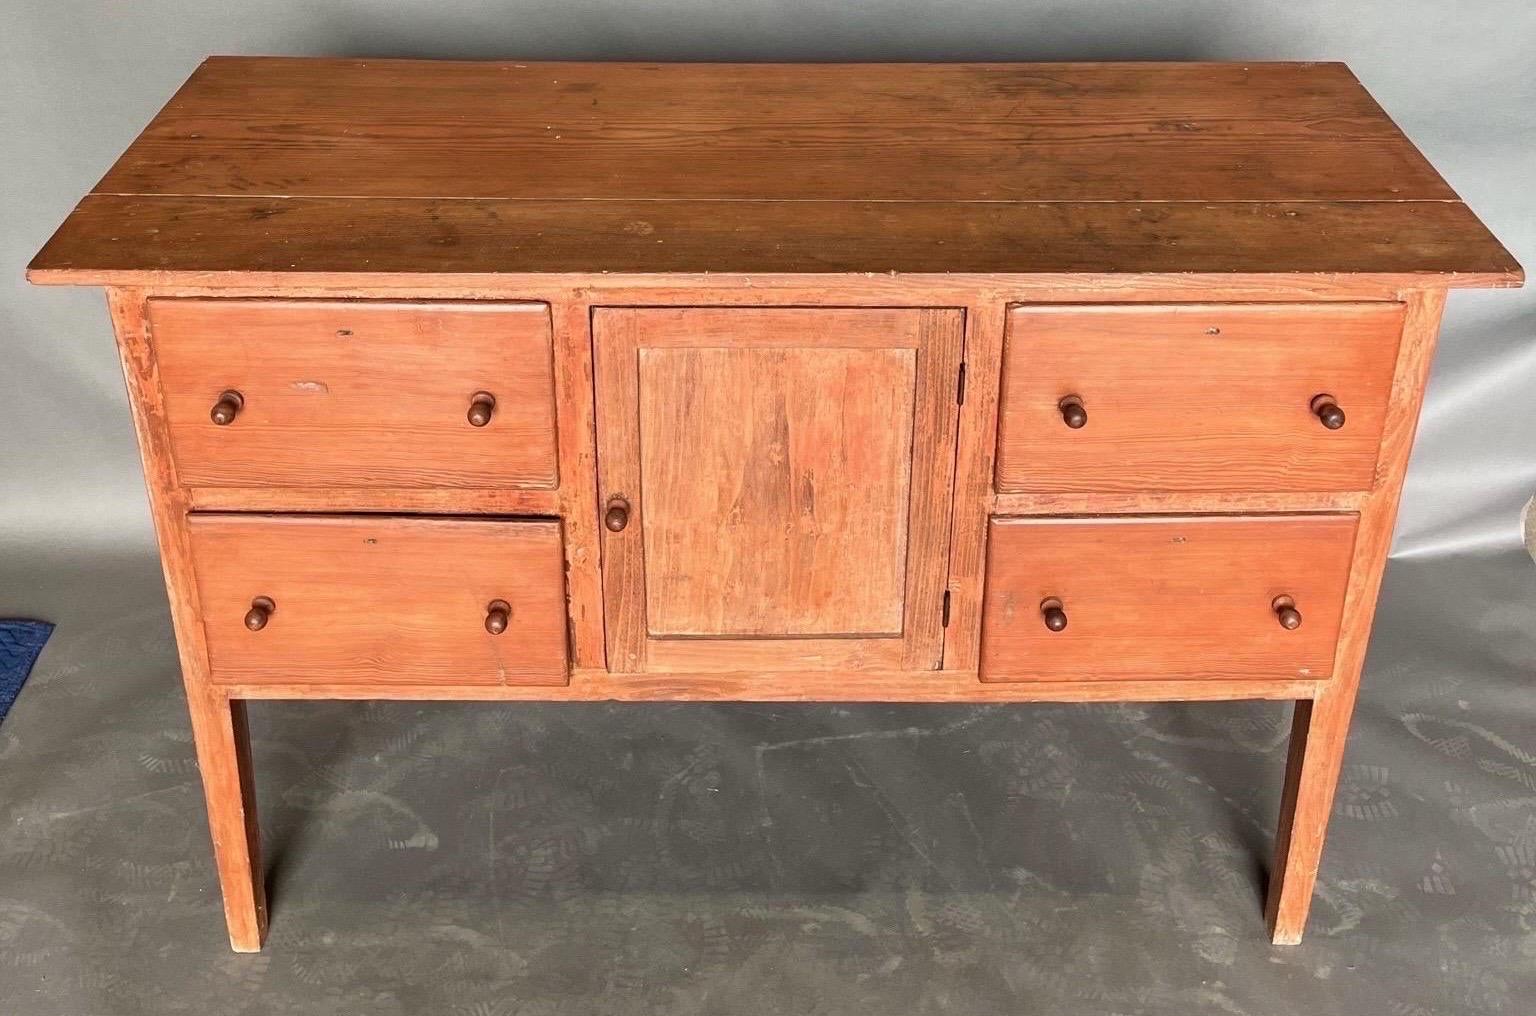 Great 19th century North Carolina yellow pine huntboard in original red paint. Recovered from a historic home in Carolina County, VA